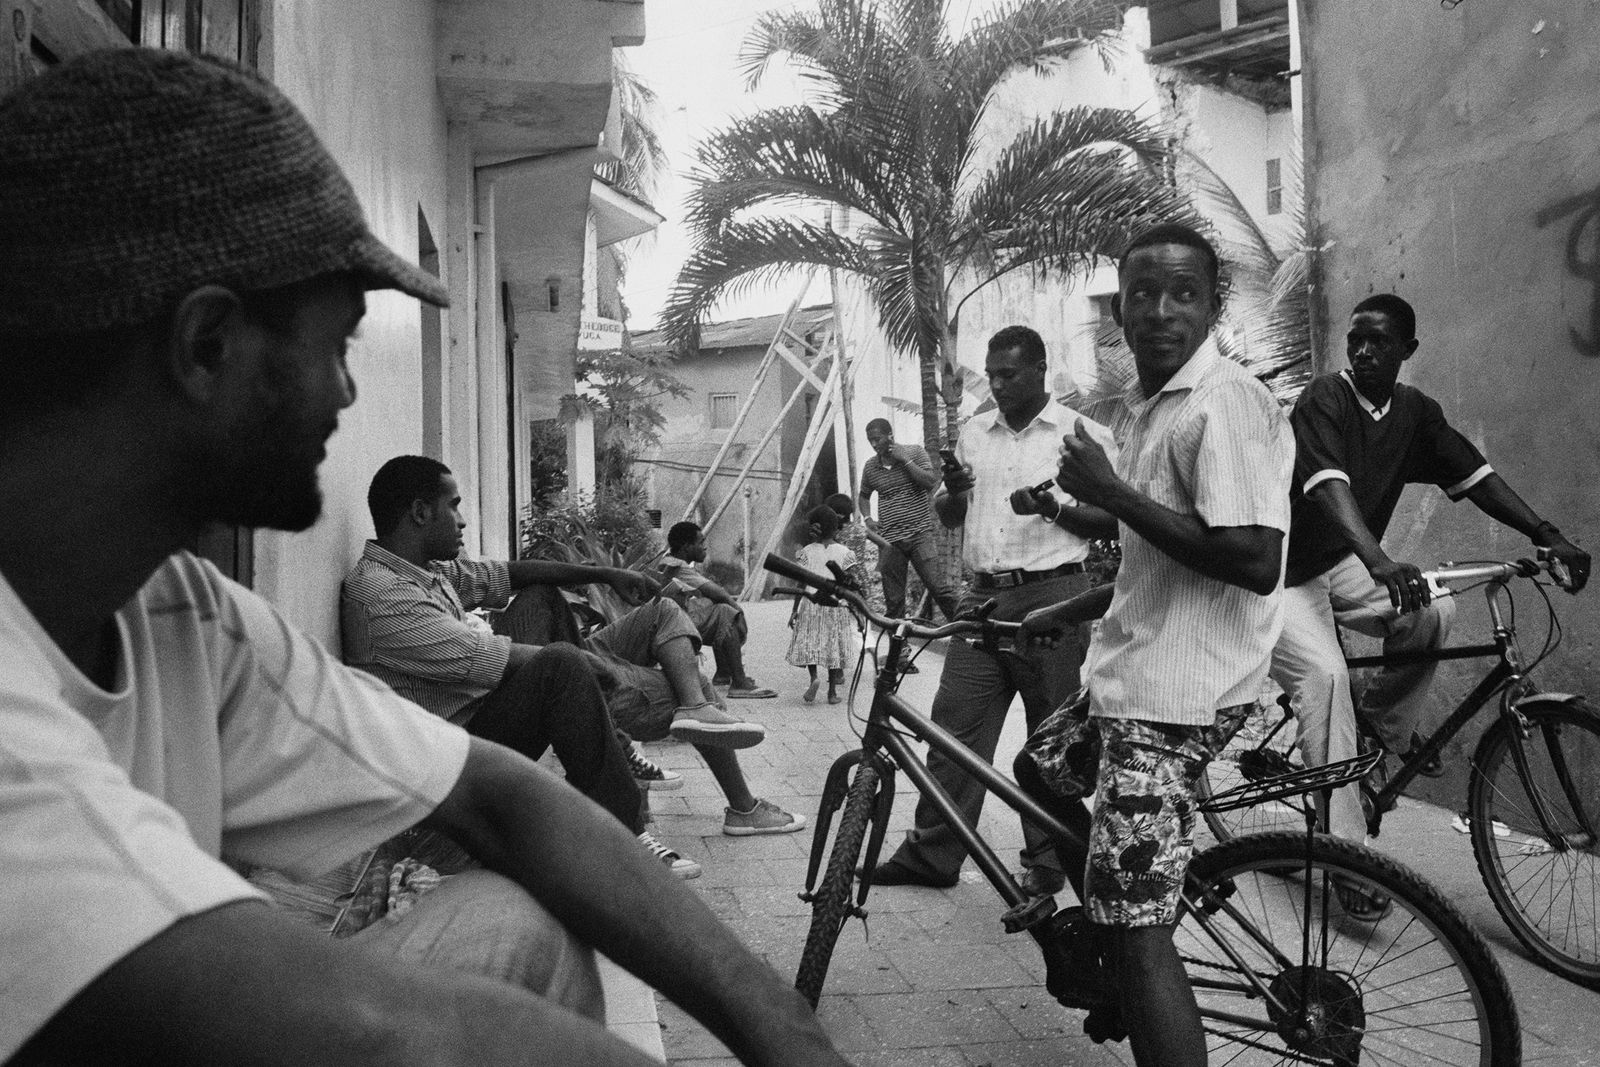 © Ania Gruca - Group of young men socializing in the streets of Stone Town, March 2010.